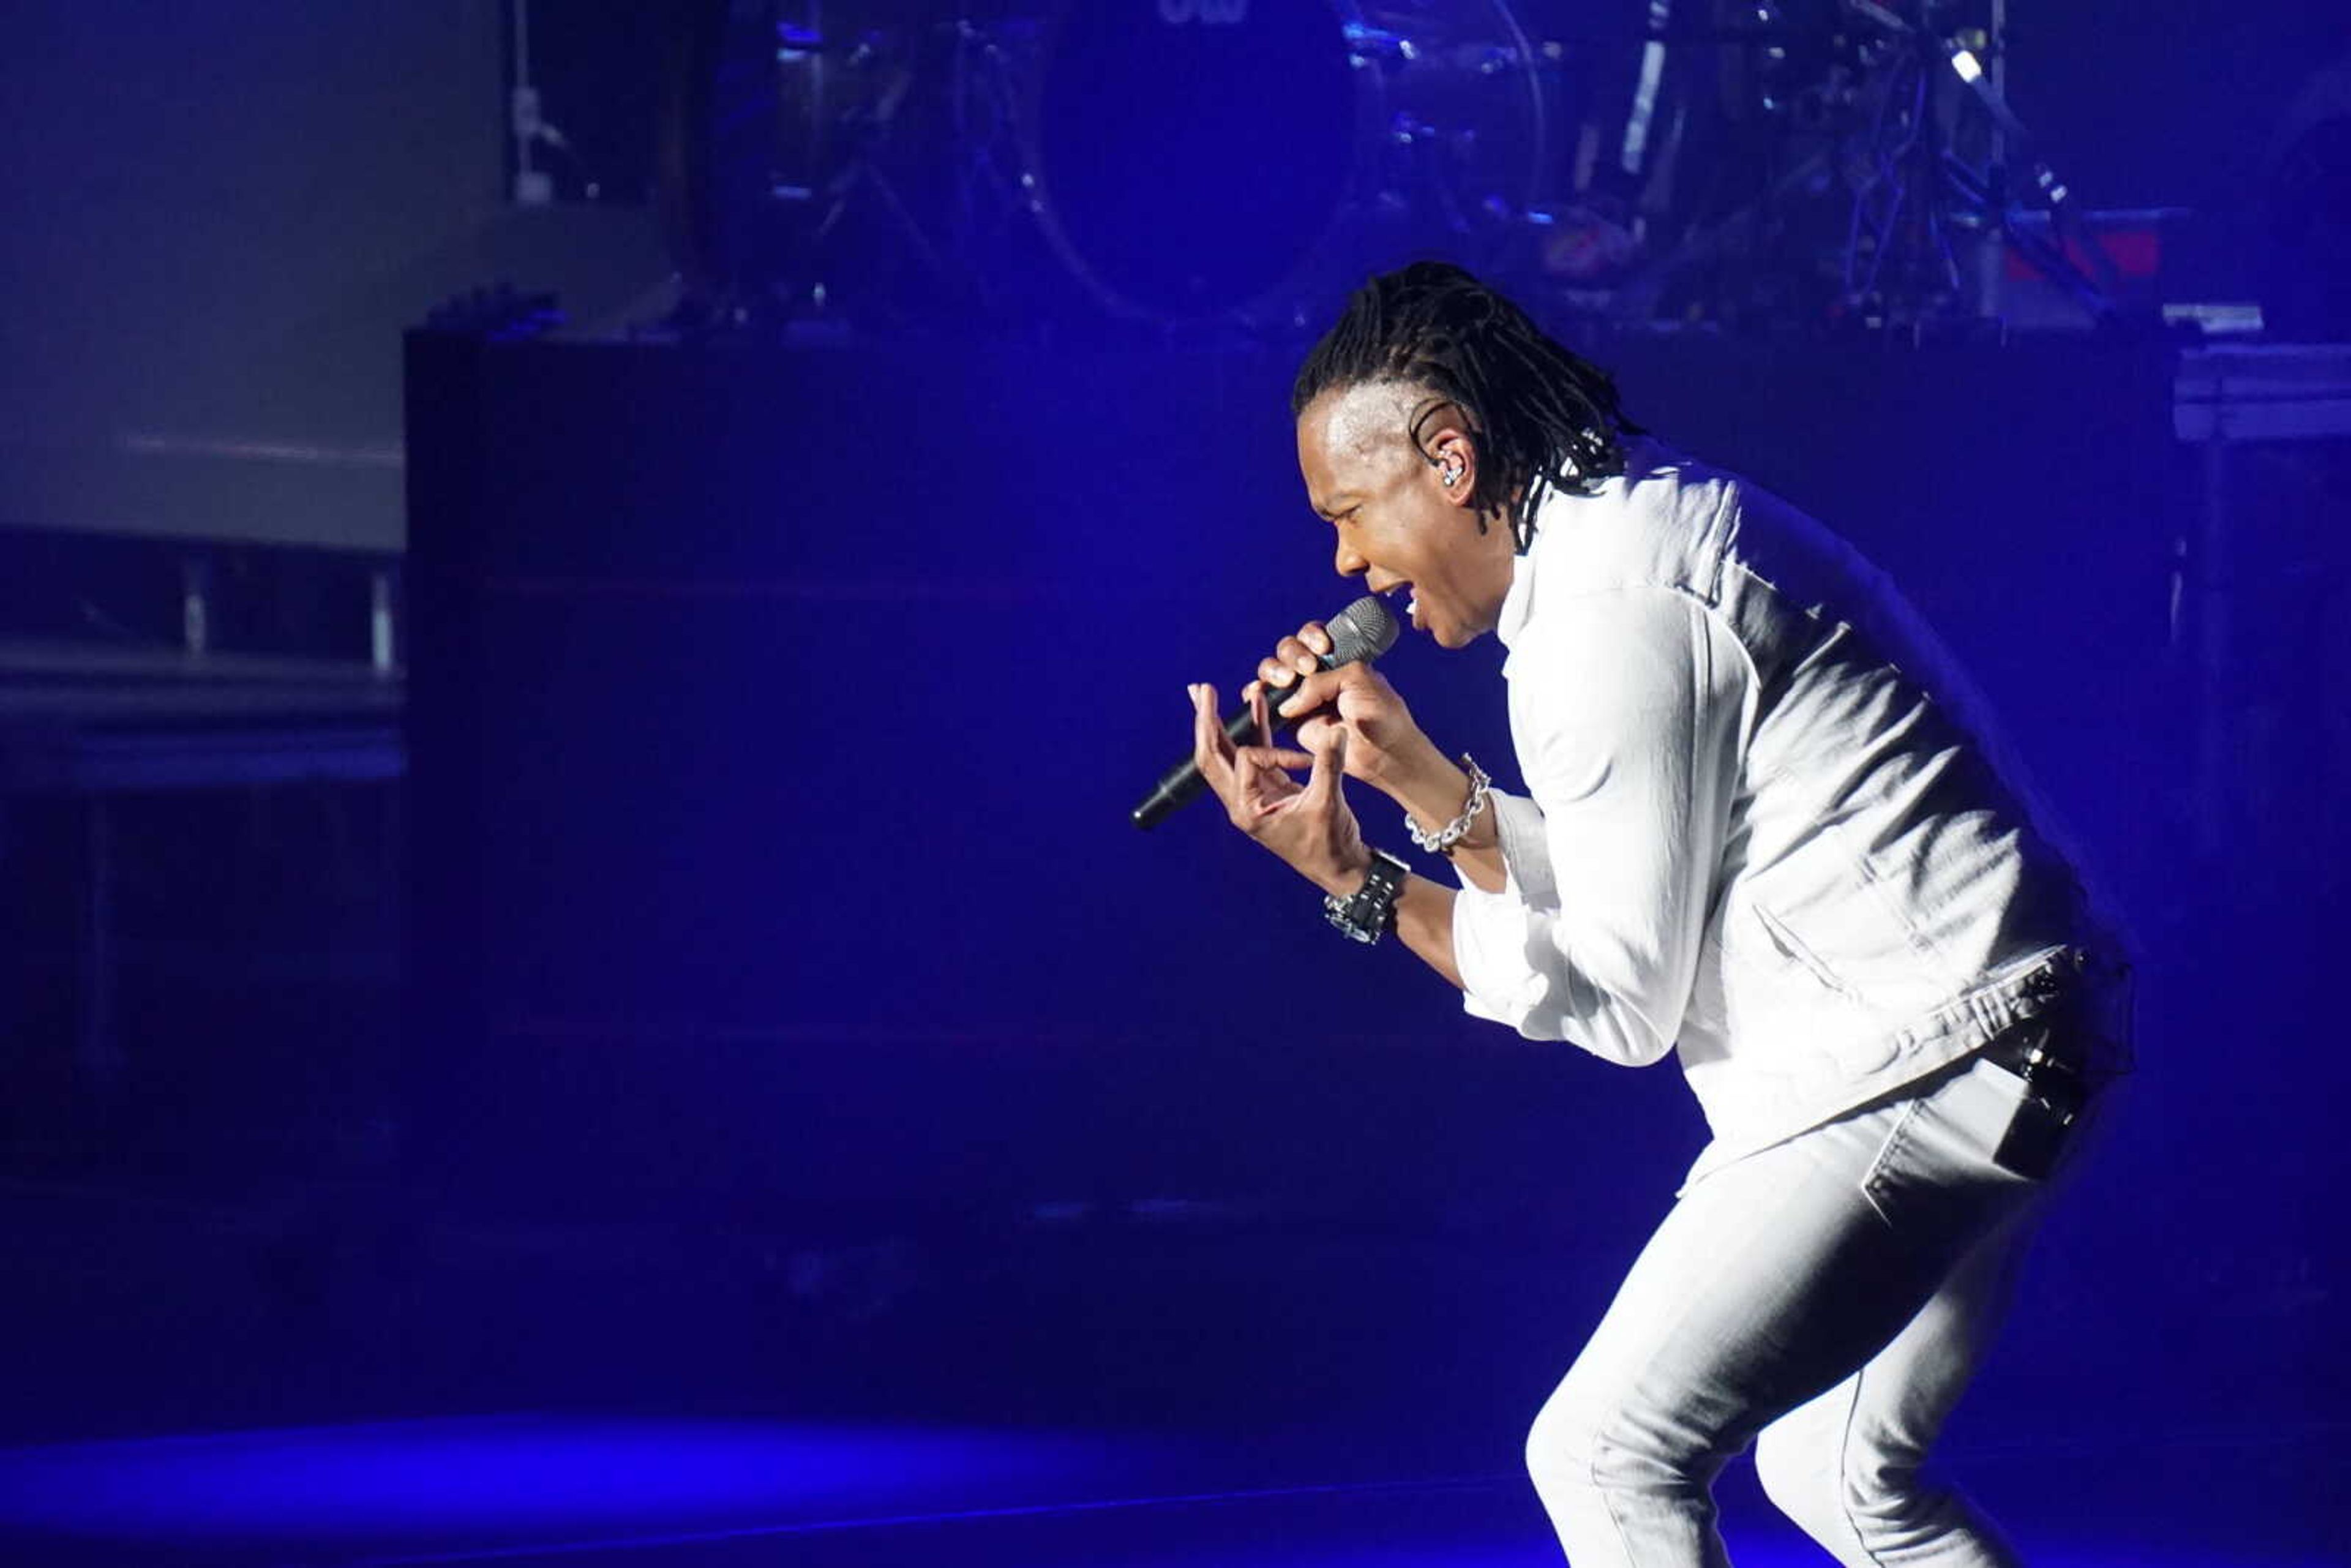 Michael Tait from the Newsboys sings to the crowd at the Show Me Center.